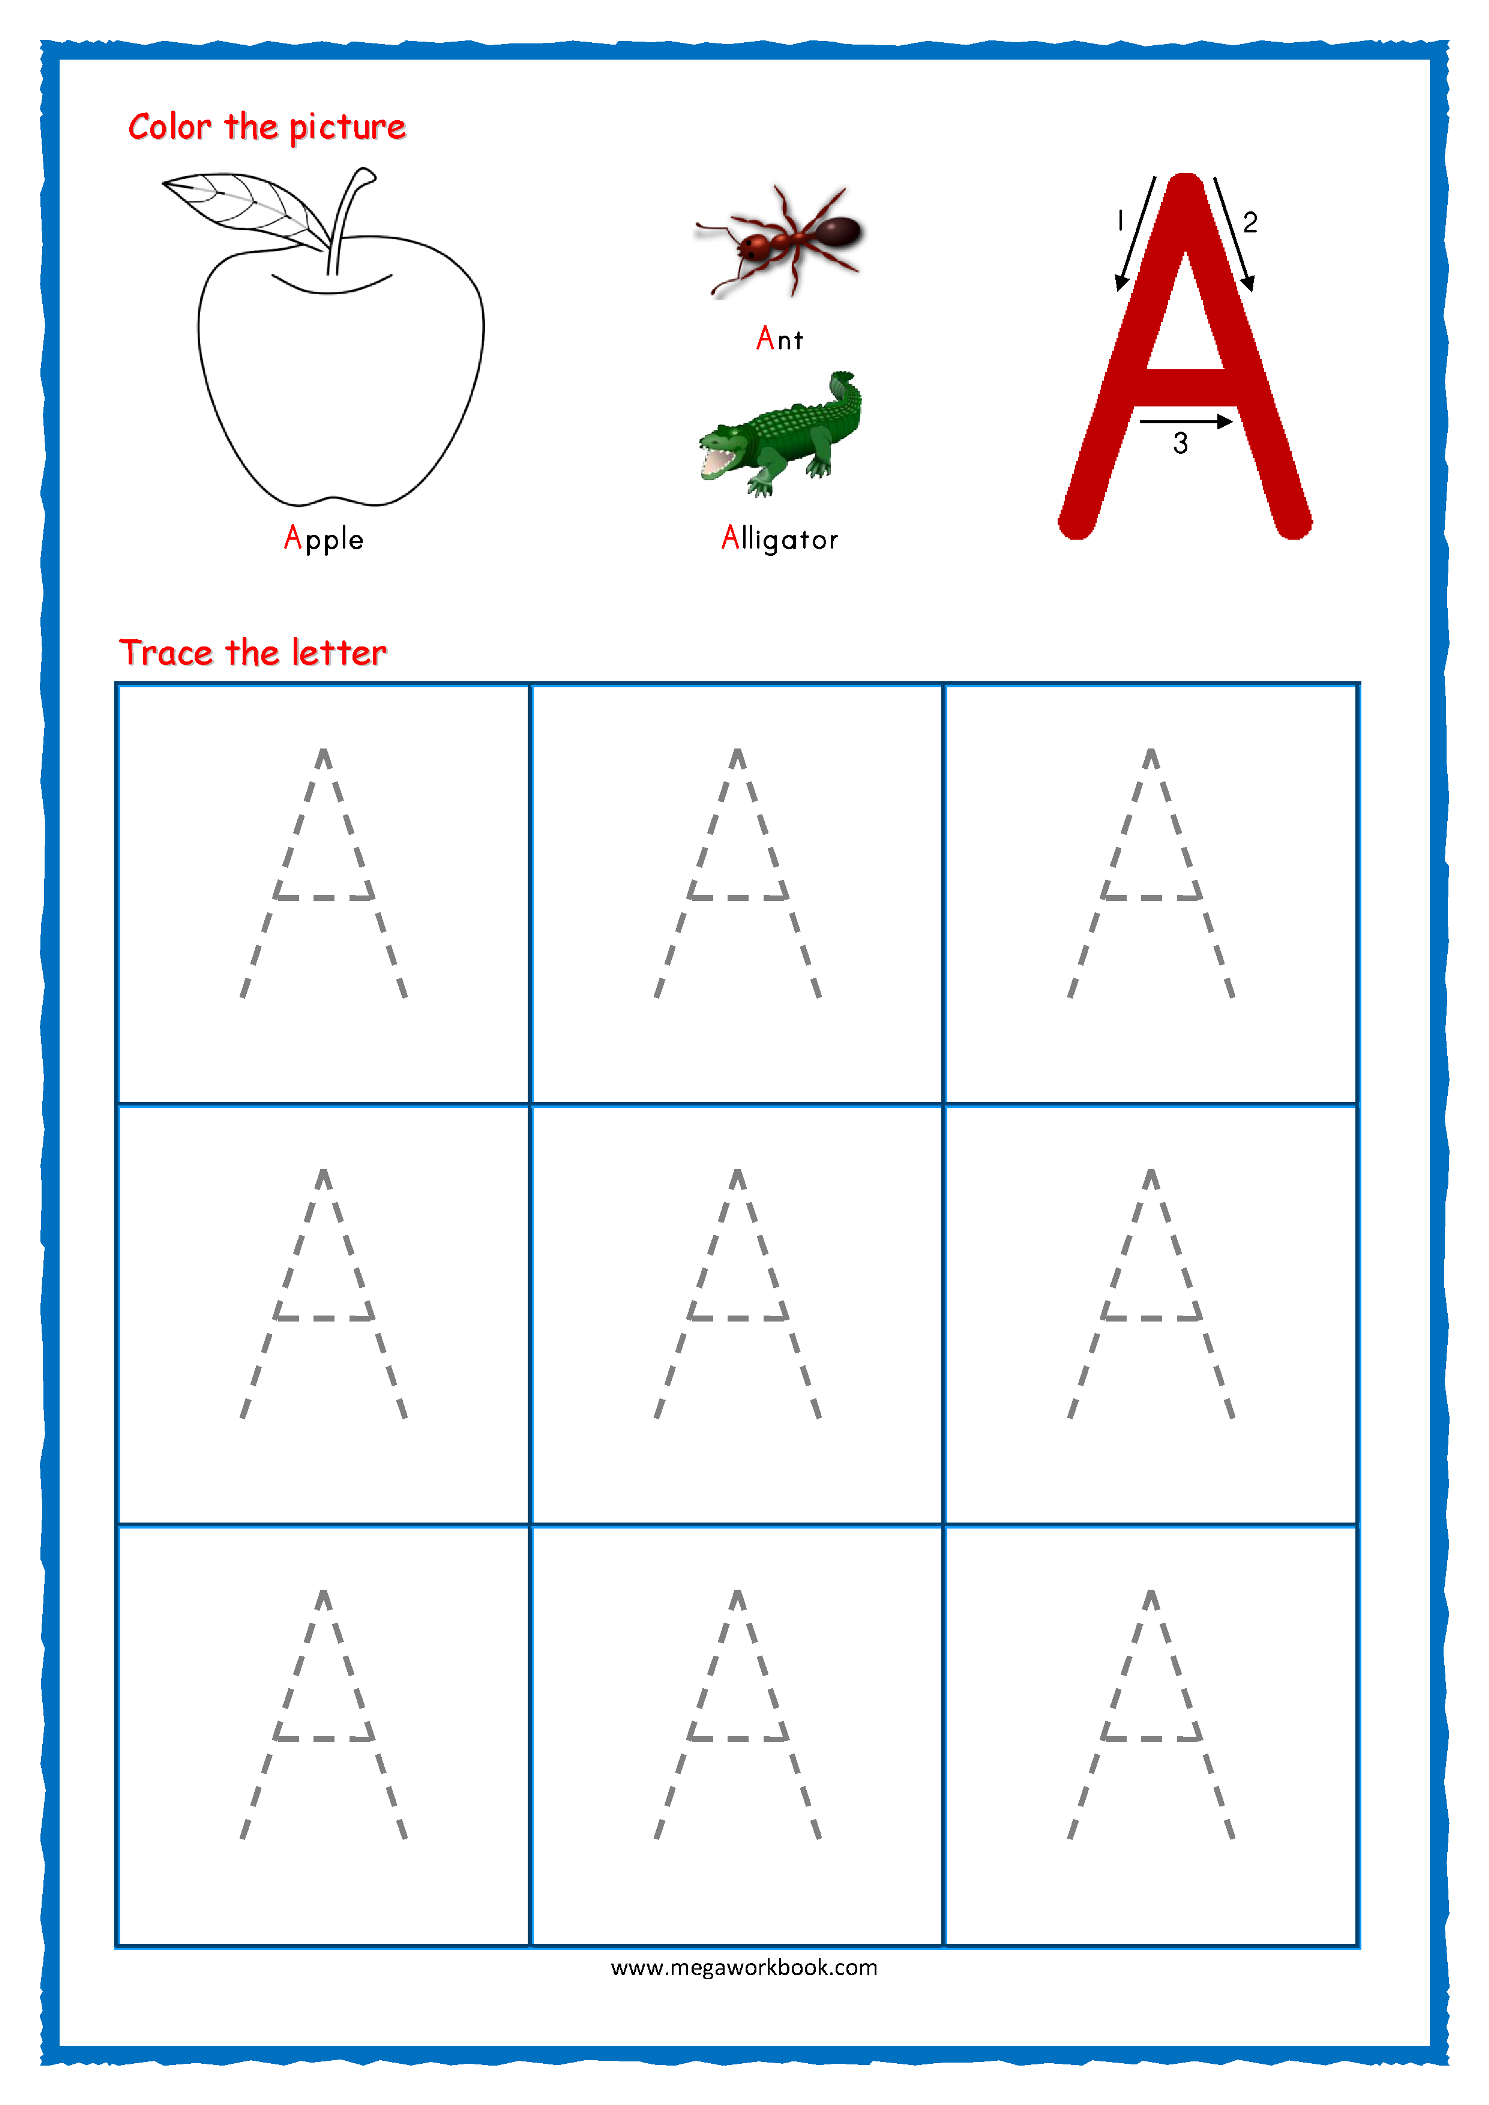 Tracing Letters - Alphabet Tracing - Capital Letters for Printable Tracing Letters For Kids